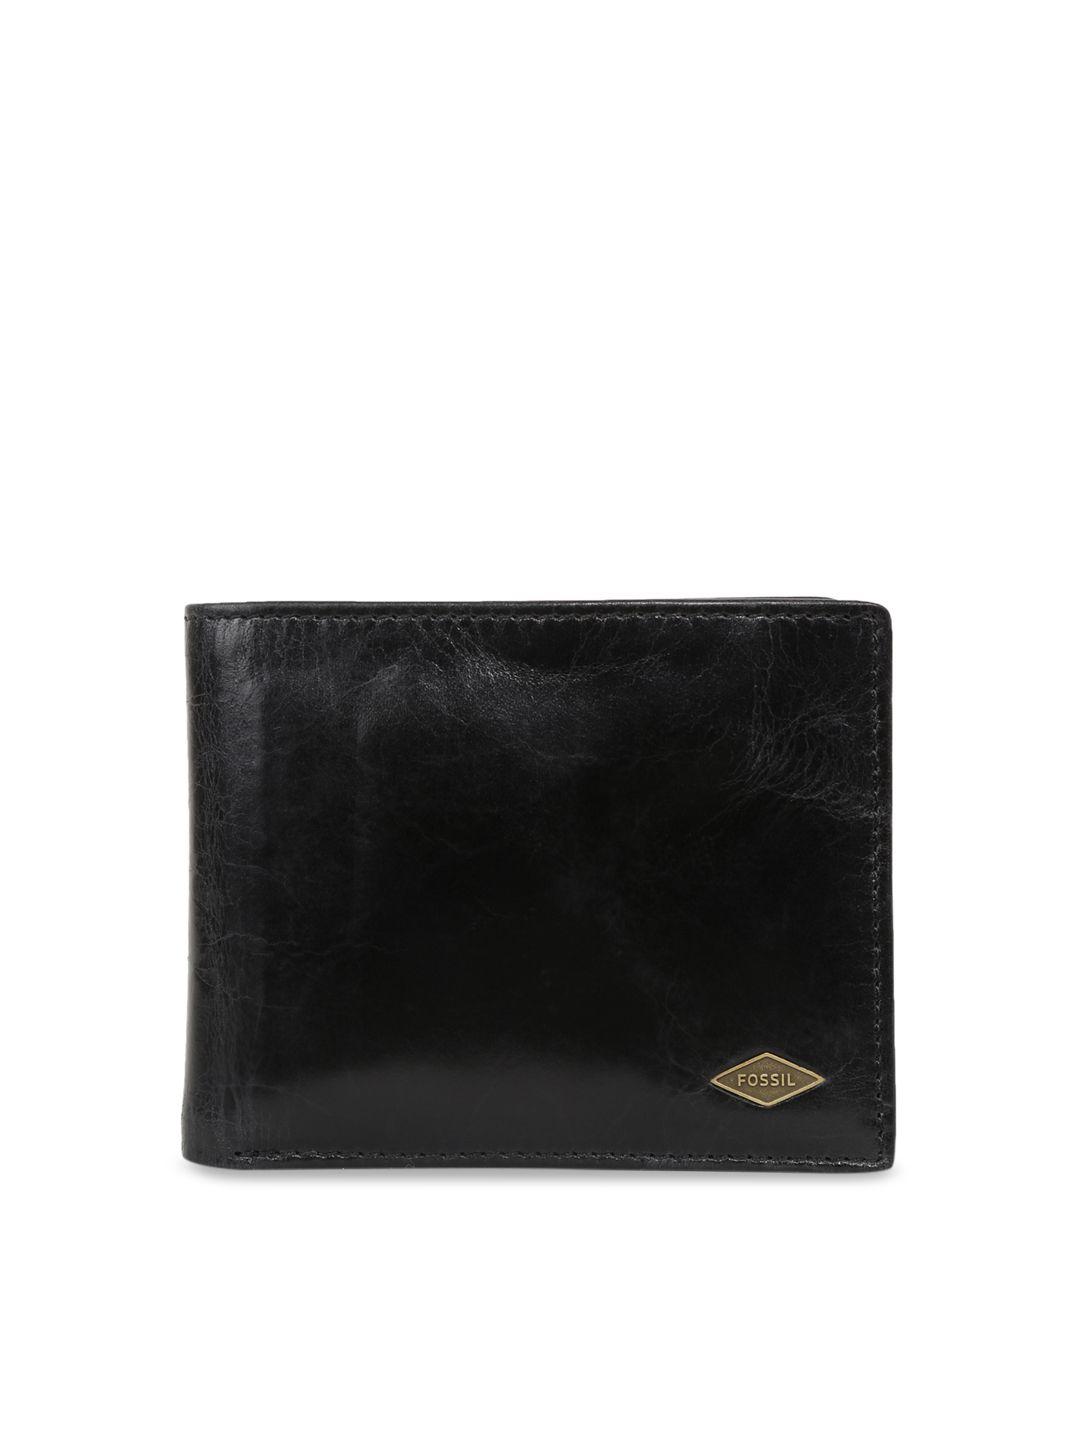 fossil men black solid leather two fold wallet